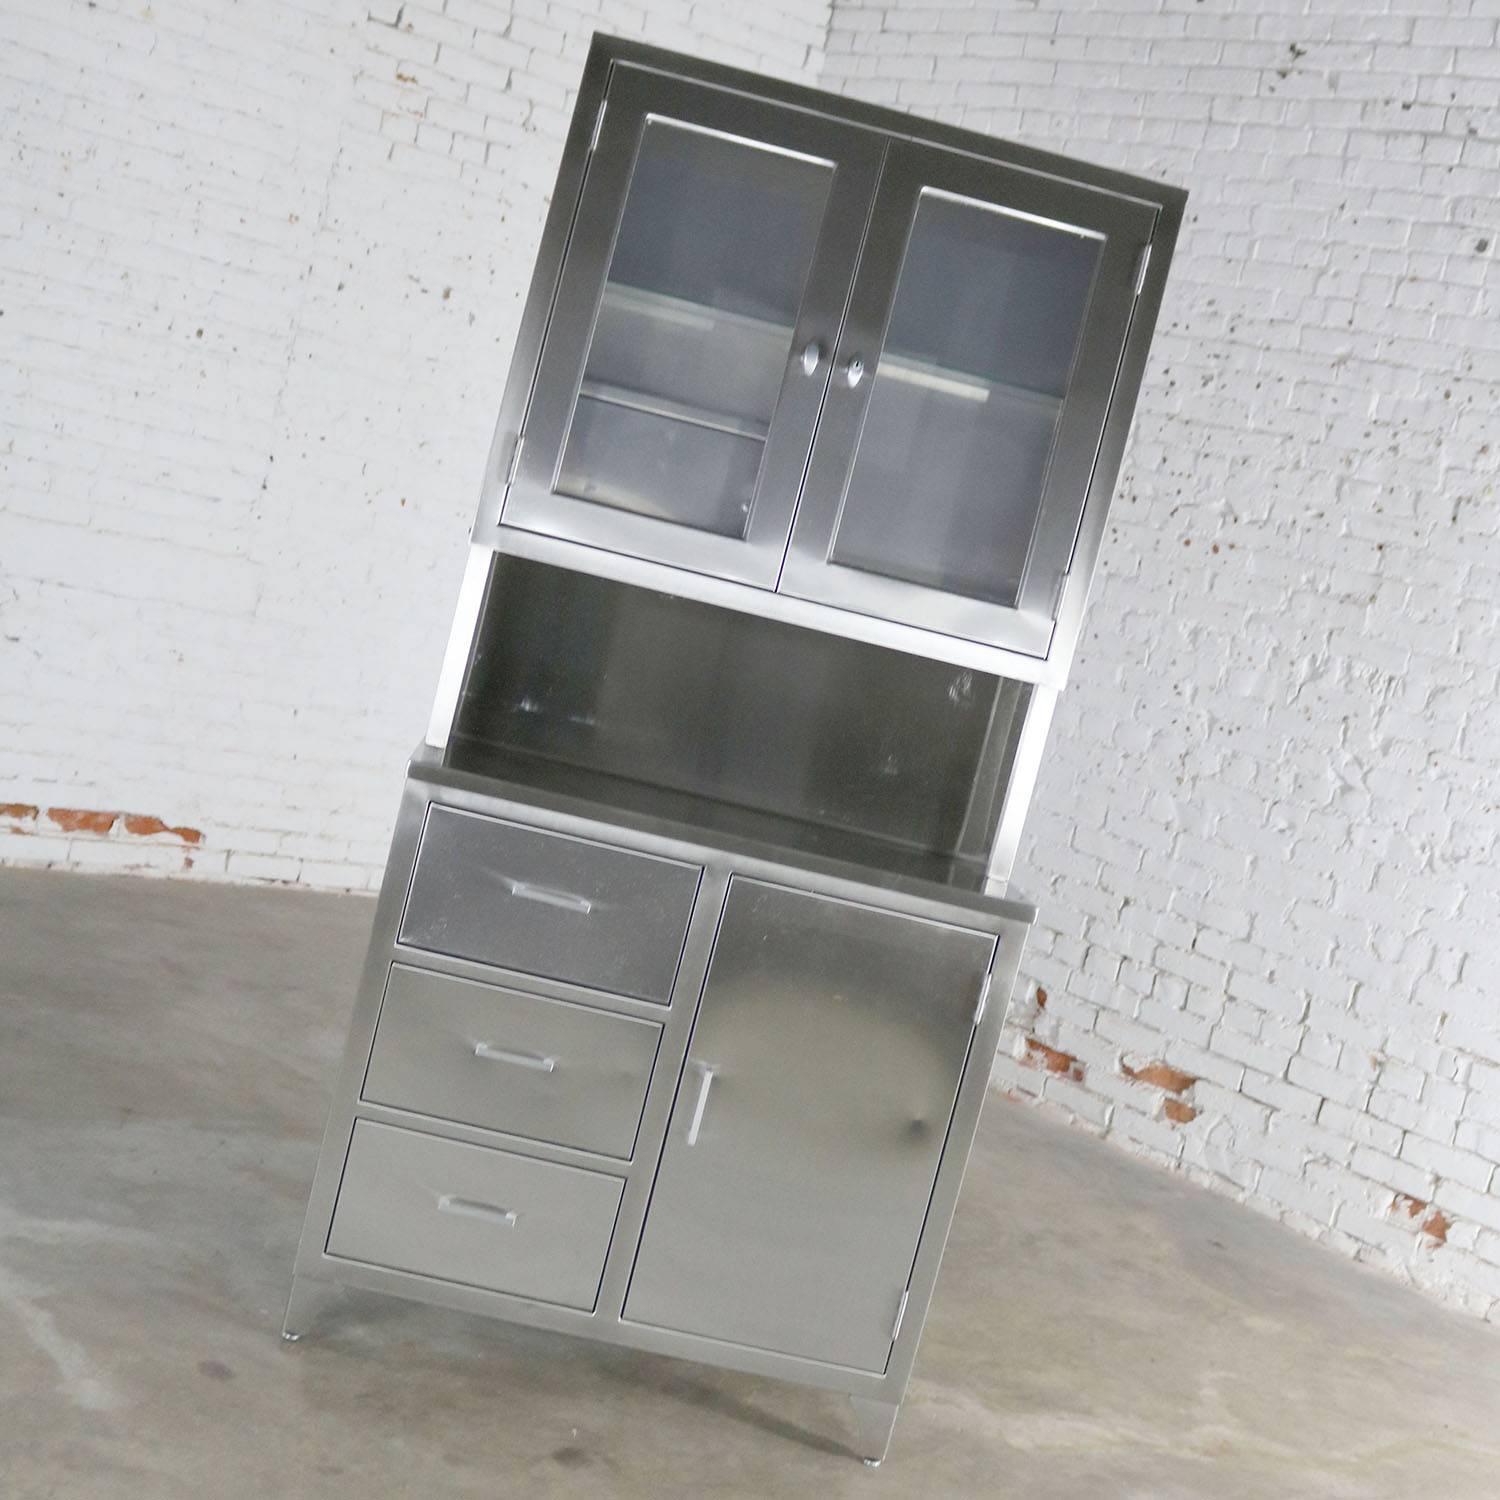 Incredible Industrial medical cupboard in stainless steel and glass. In great vintage condition.

Wow! What an awesome find for your Industrial loft kitchen or your backyard gazebo kitchen. Made in the style of an old kitchen cupboard with a solid